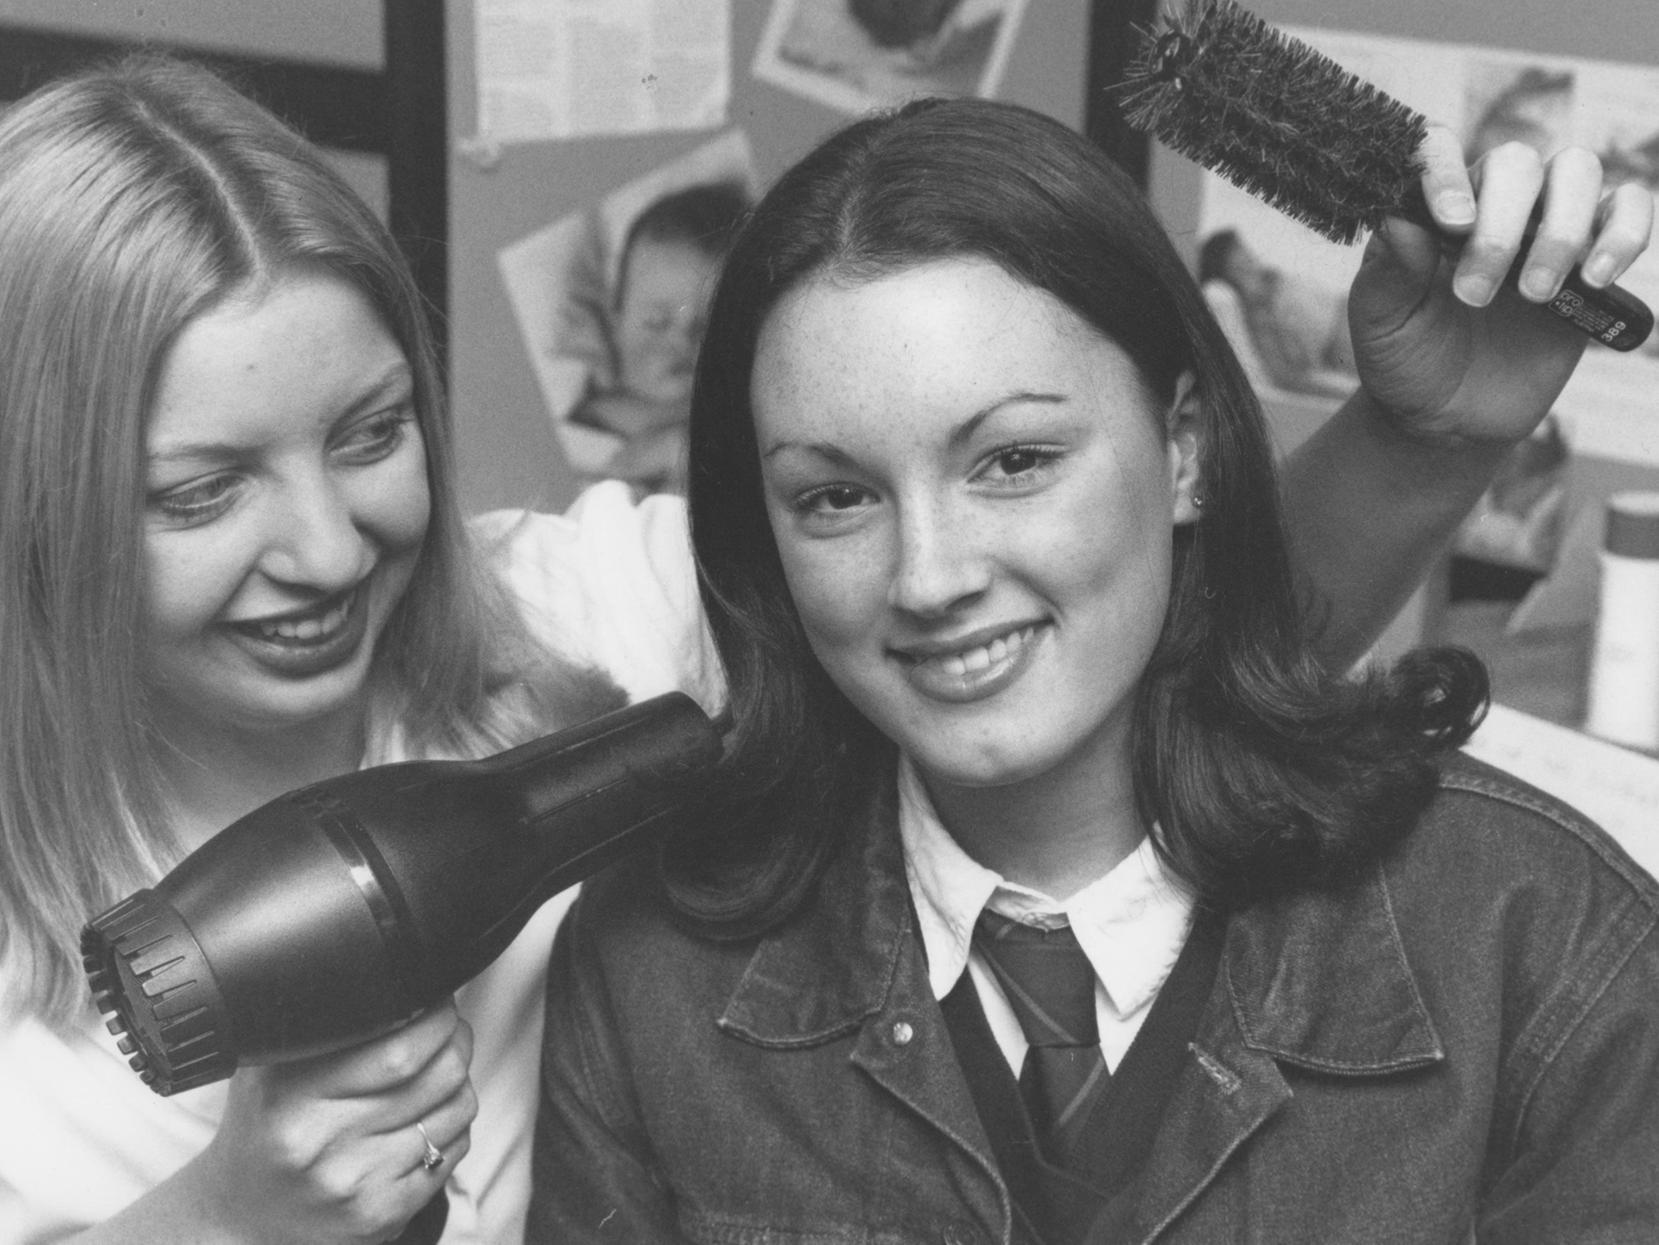 Yorkshire Coast College opened its doors to potential students for its annual open day back in November 1997. Pictured is Nicola Barker, hairdressing student, demonstrating her skills on St Augustine's School pupil Vickie Wyatt.